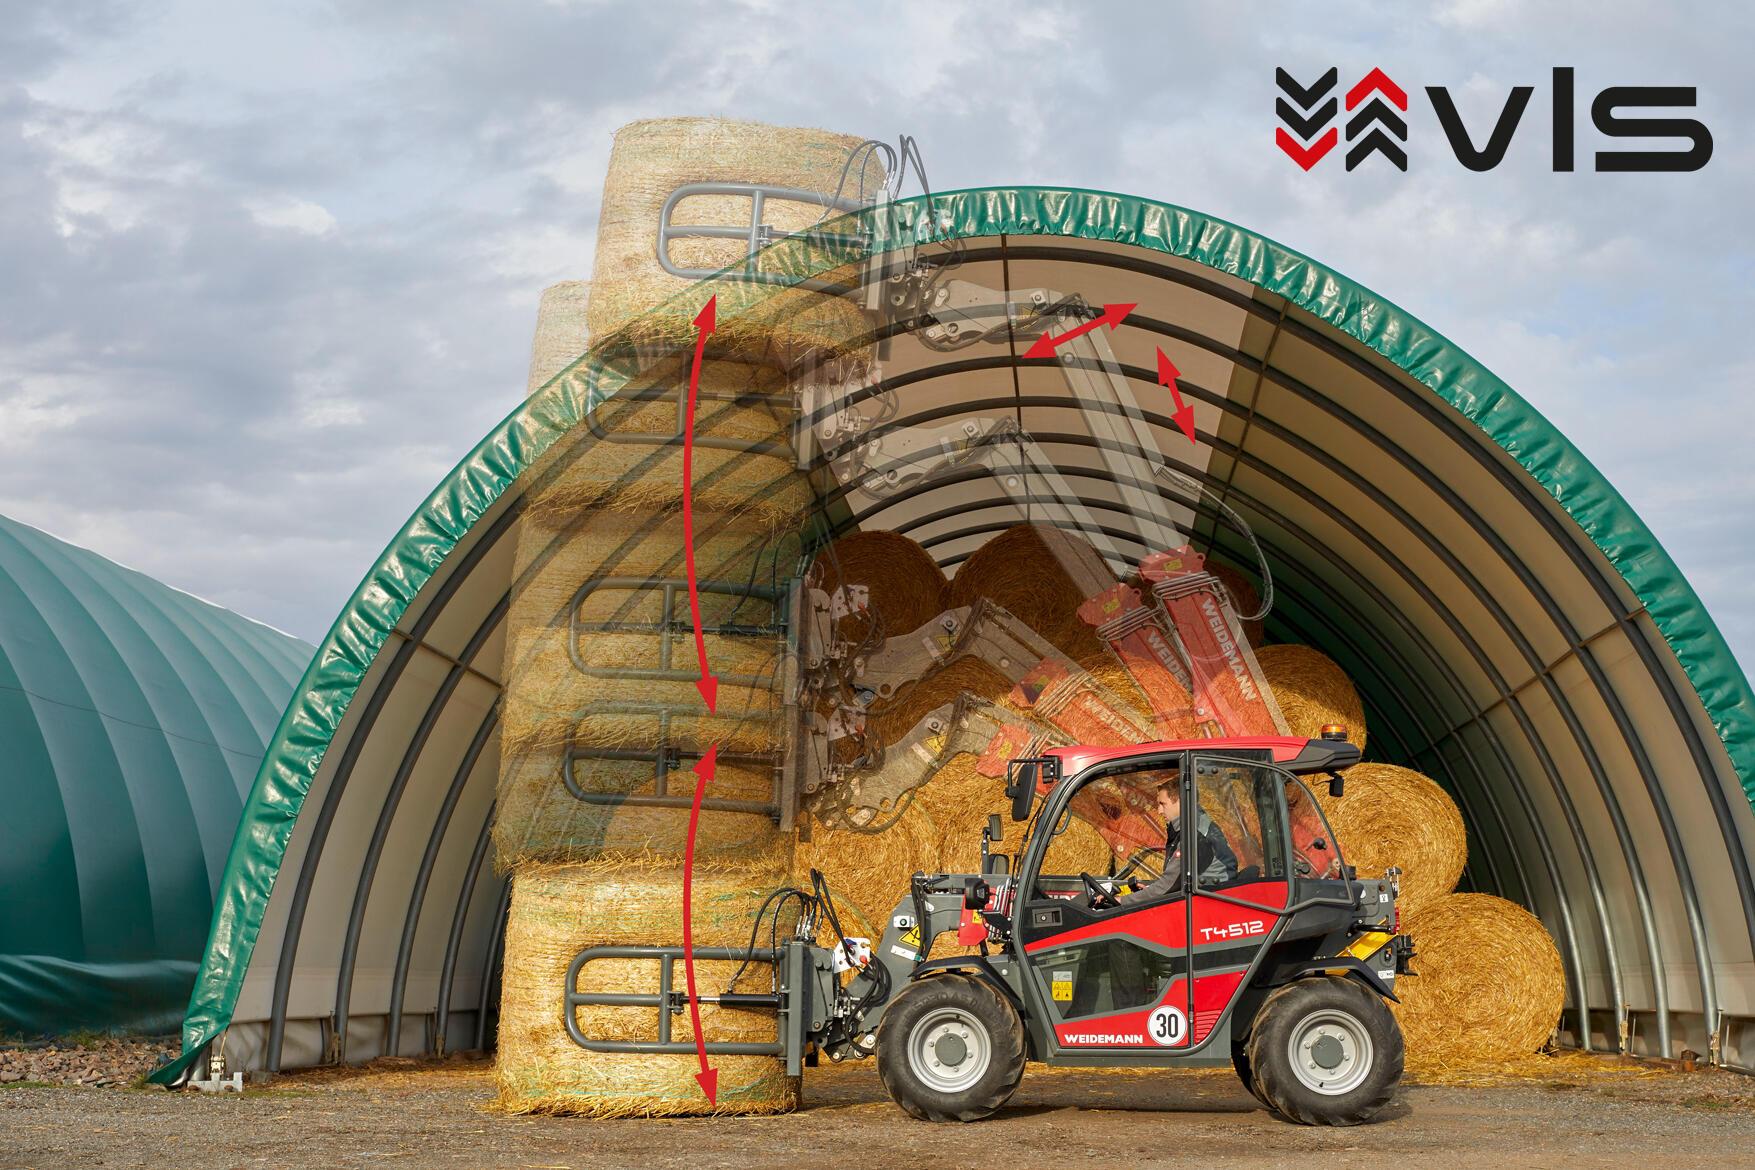 Weidemann telehandler T4512 use with round bale tong and the Vertical Lift System (vls) presented with arrows